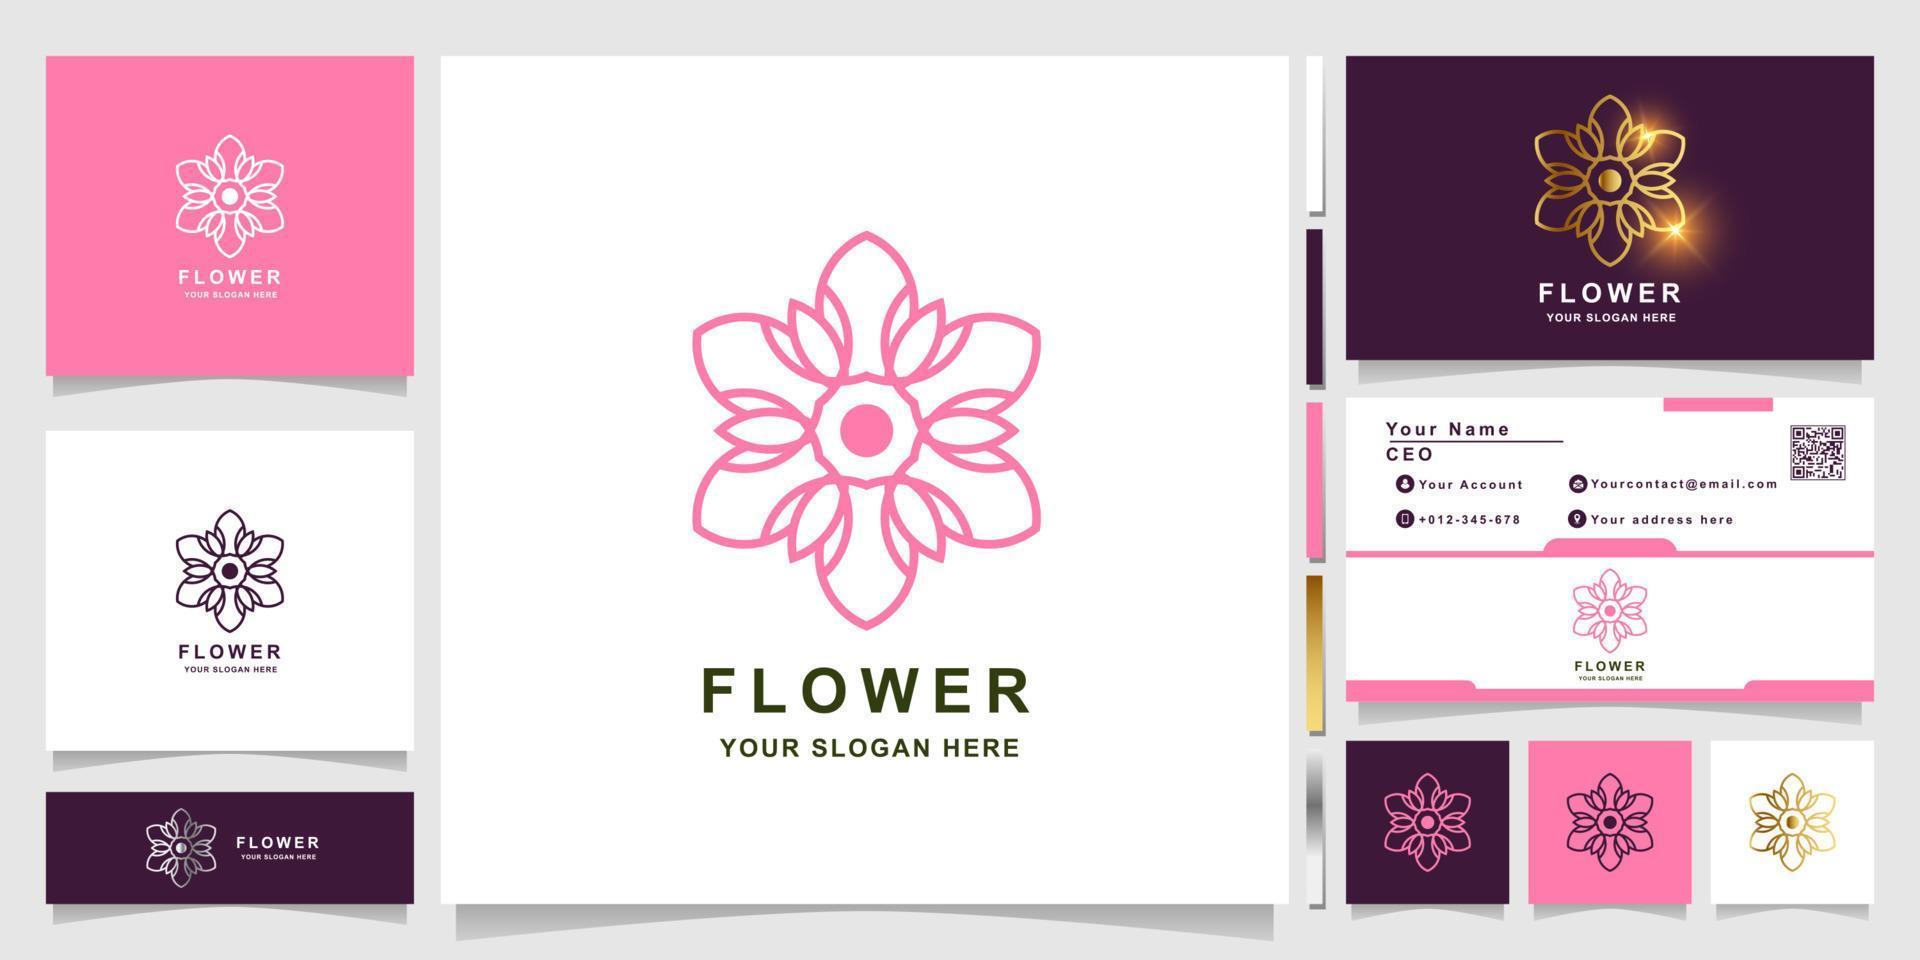 Flower, boutique or ornament logo template with business card design. Can be used spa, salon, beauty or boutique logo design. vector